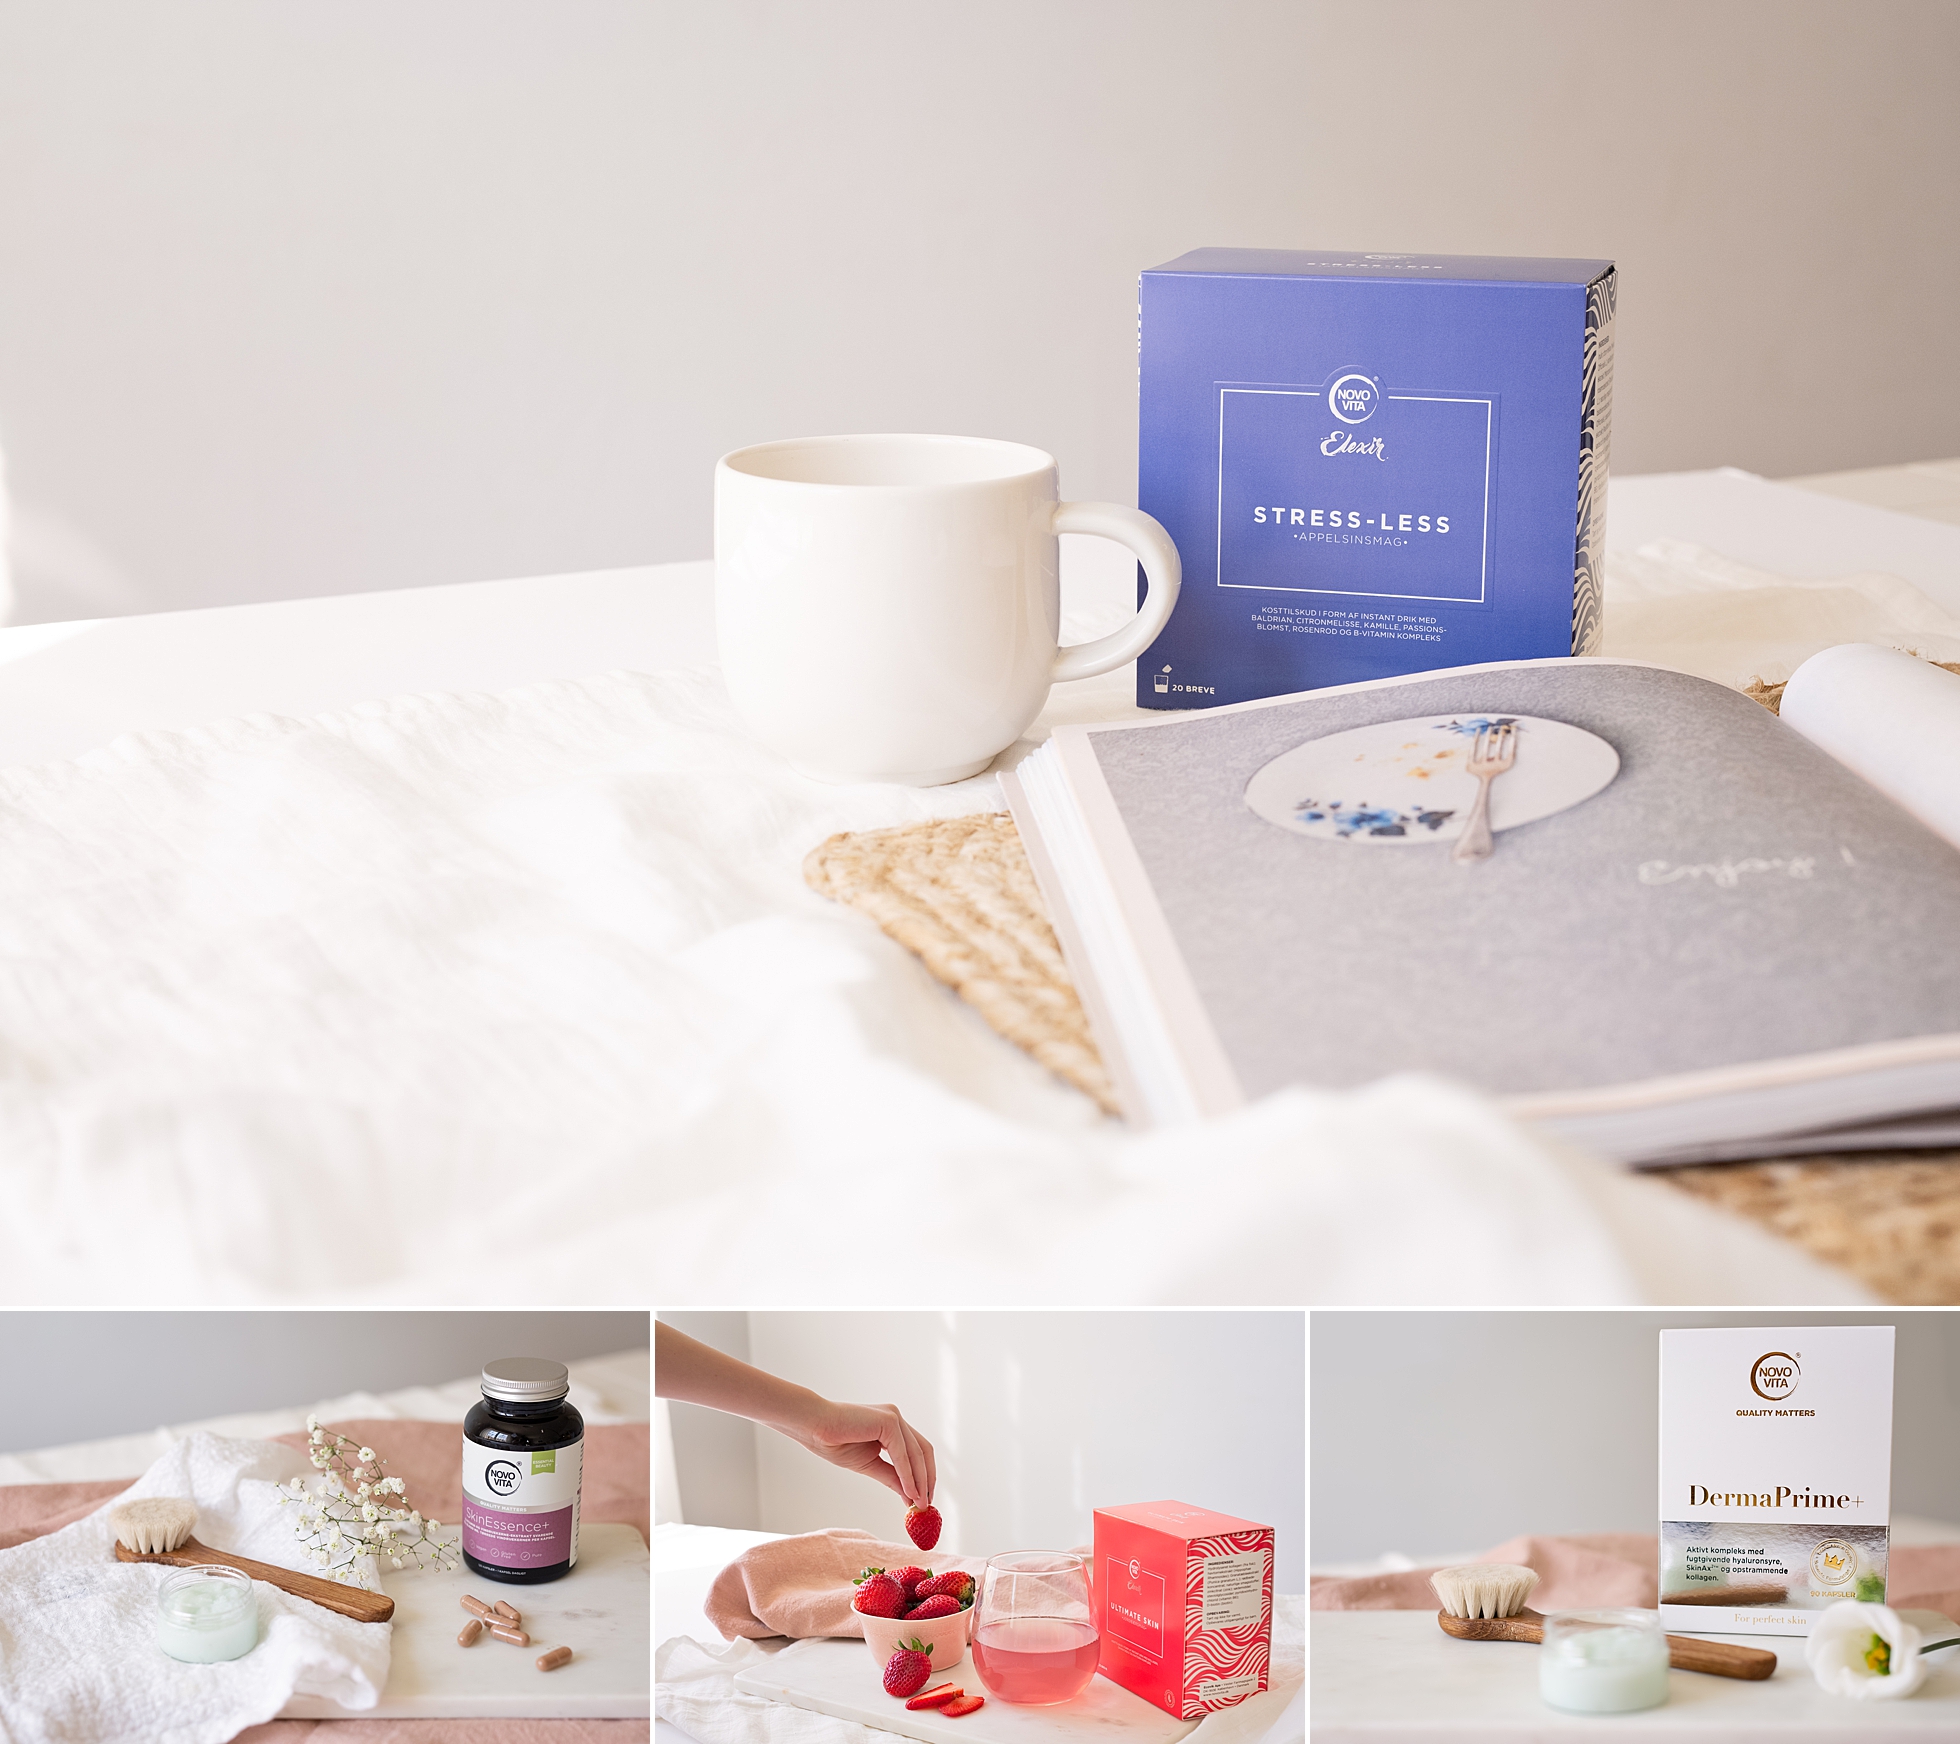 Pretty lifestyle images of healthcare products